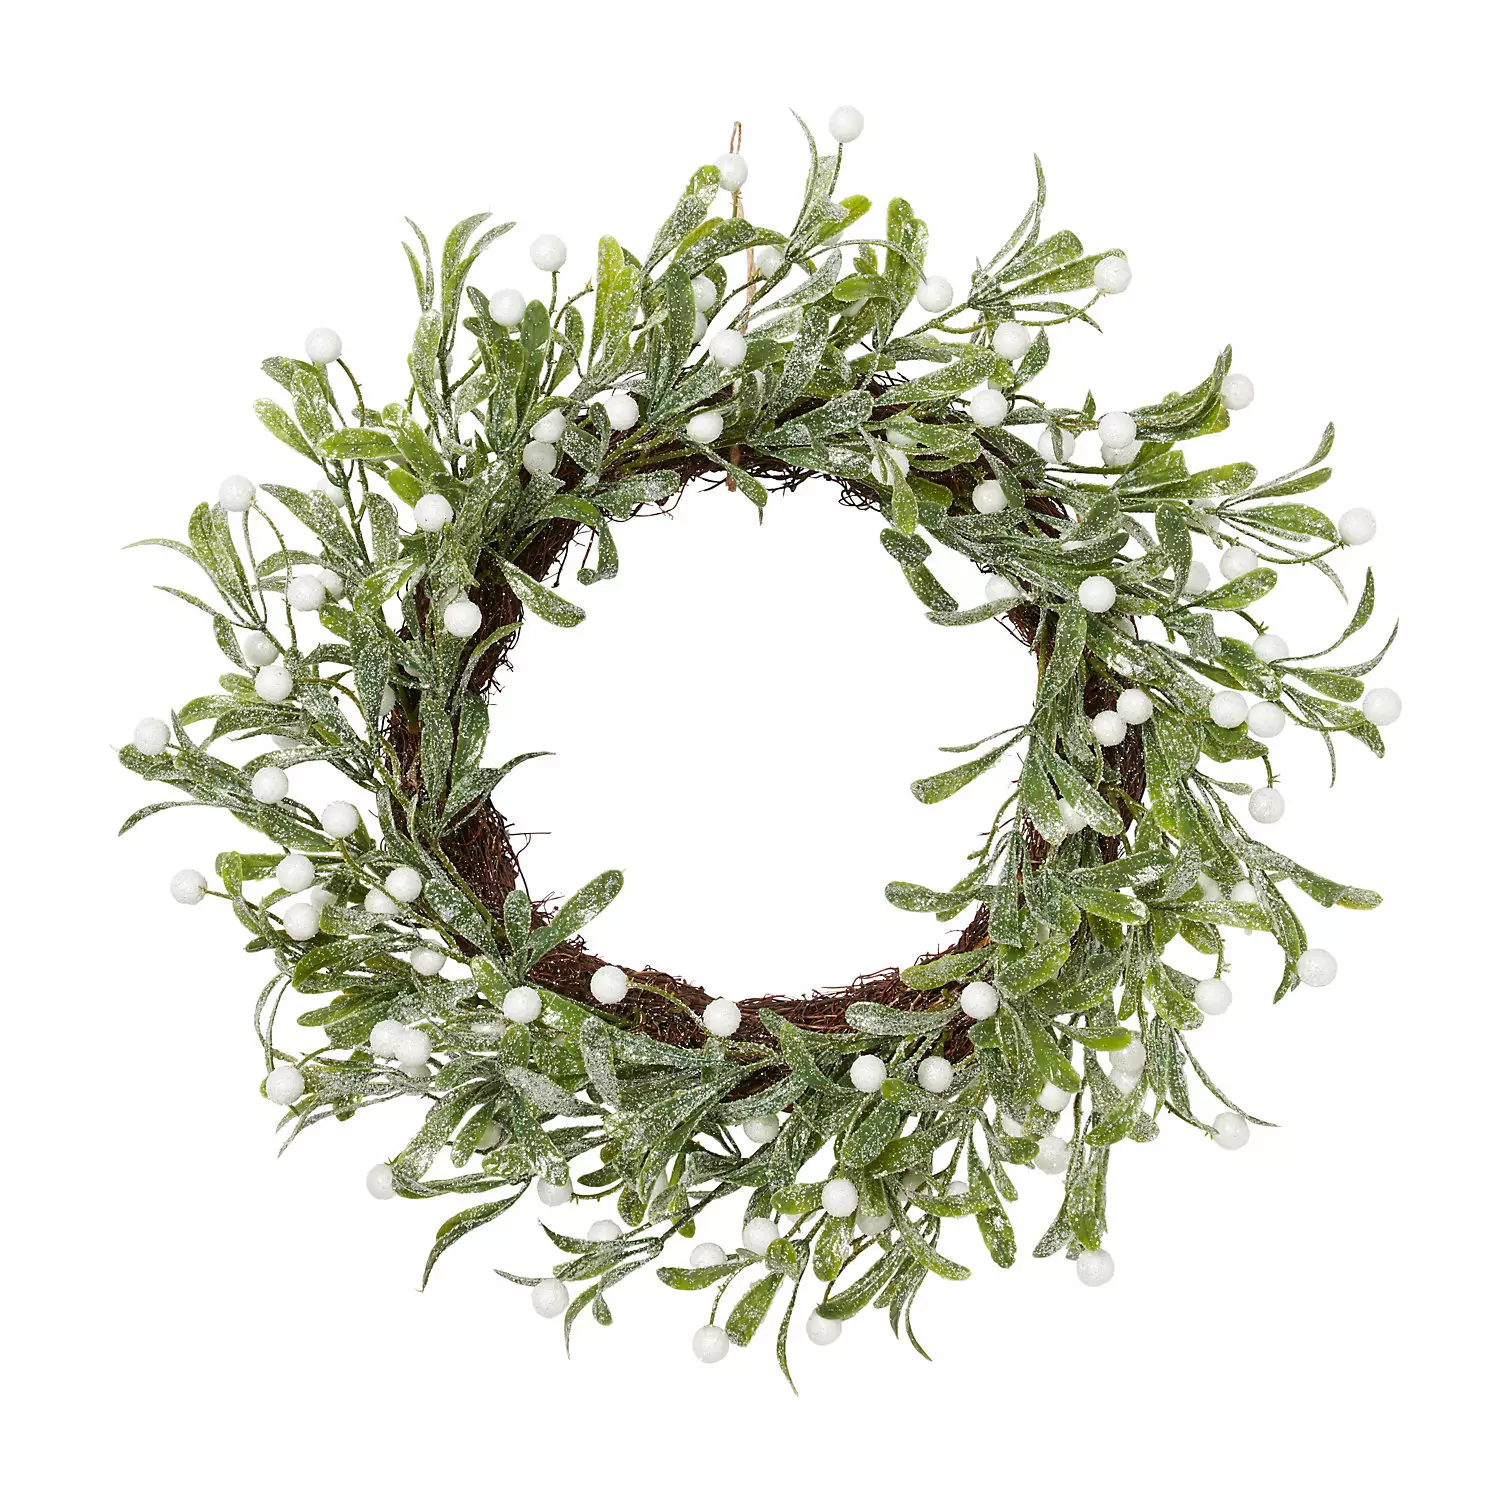 You could hang a wreath over your table to make it feel slightly grander. (